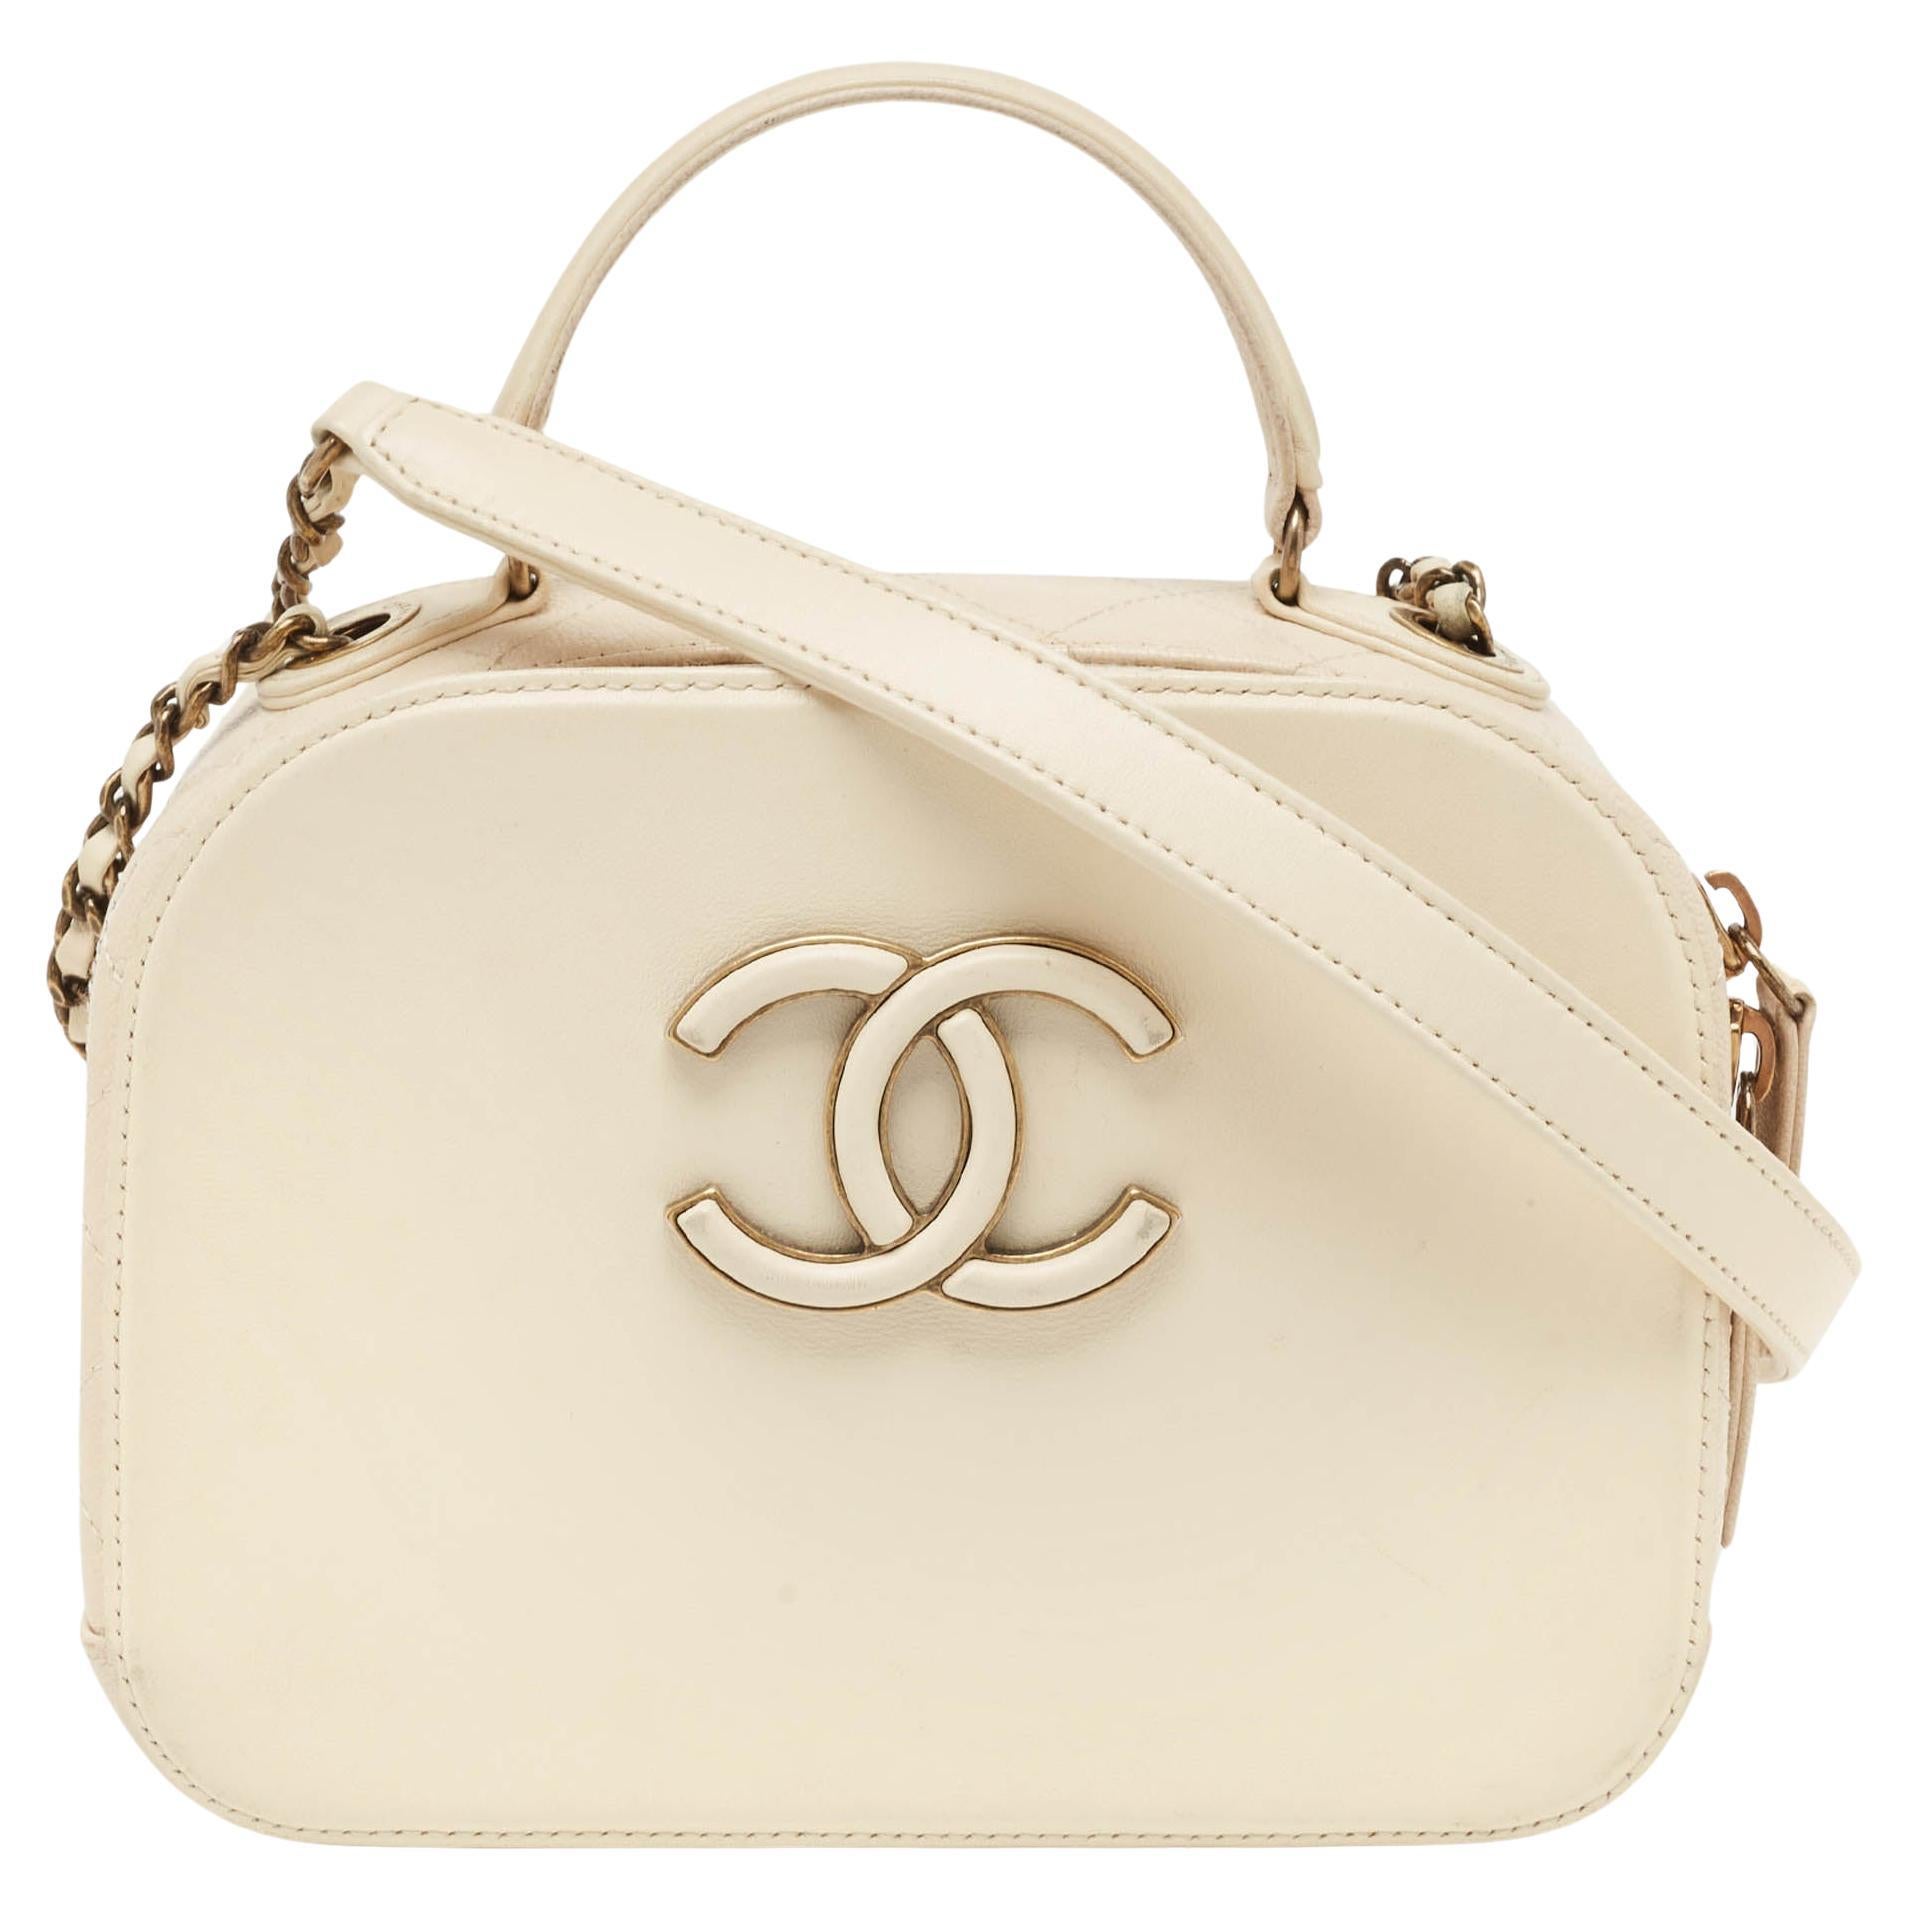 Chanel Off White Quilted Leather Coco Curve Vanity Case Bag